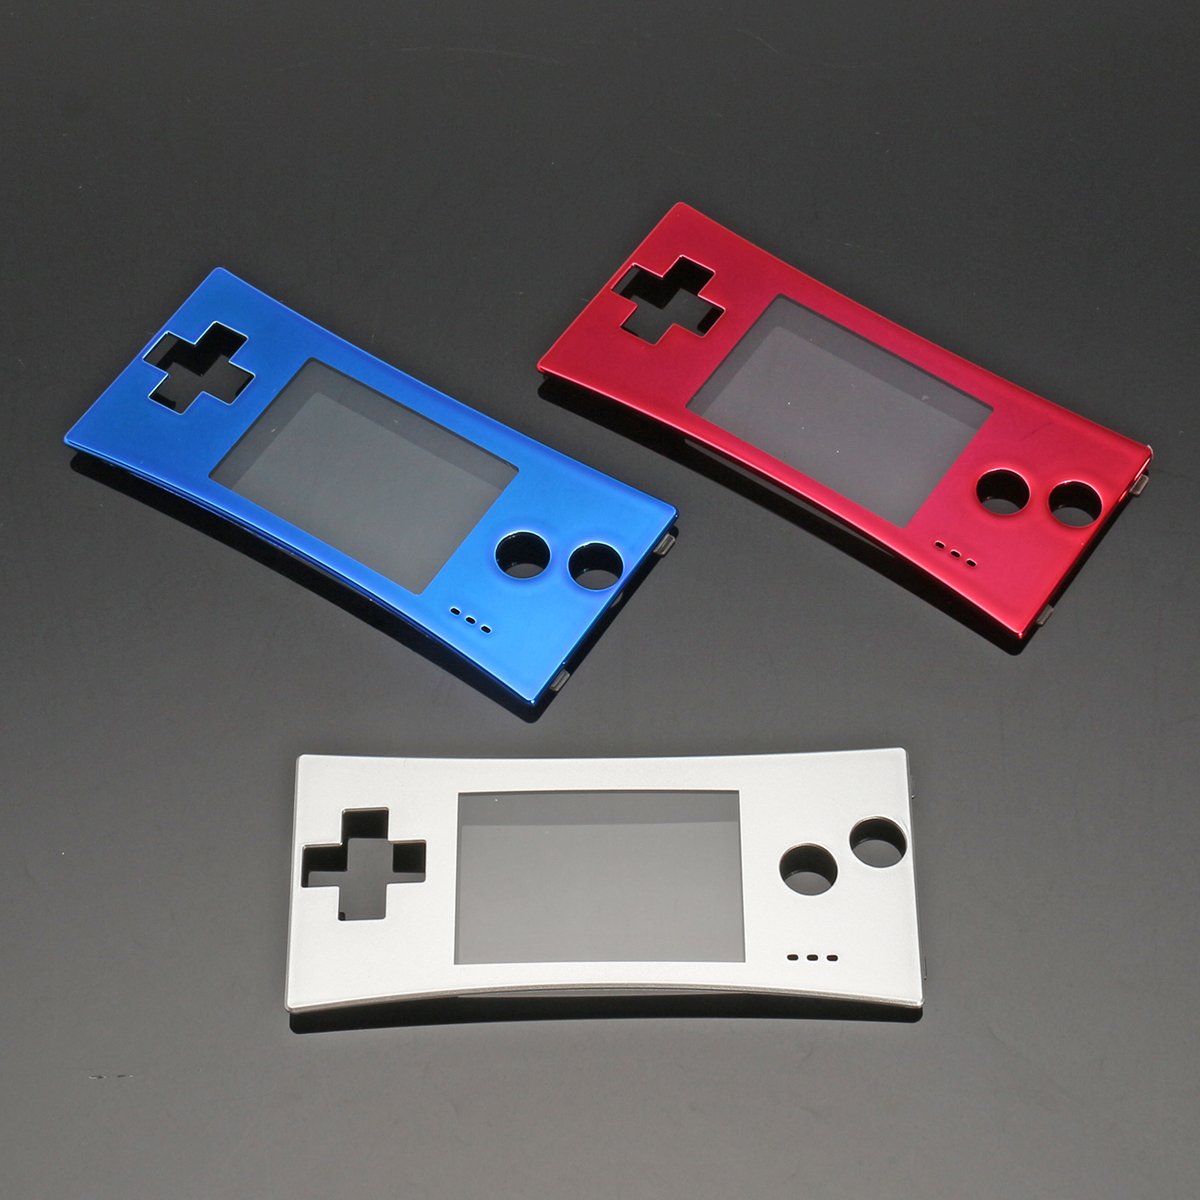 Replacement Front Shell Faceplate Cover Case Part For Nintendo Gameboy Micro GBM 1